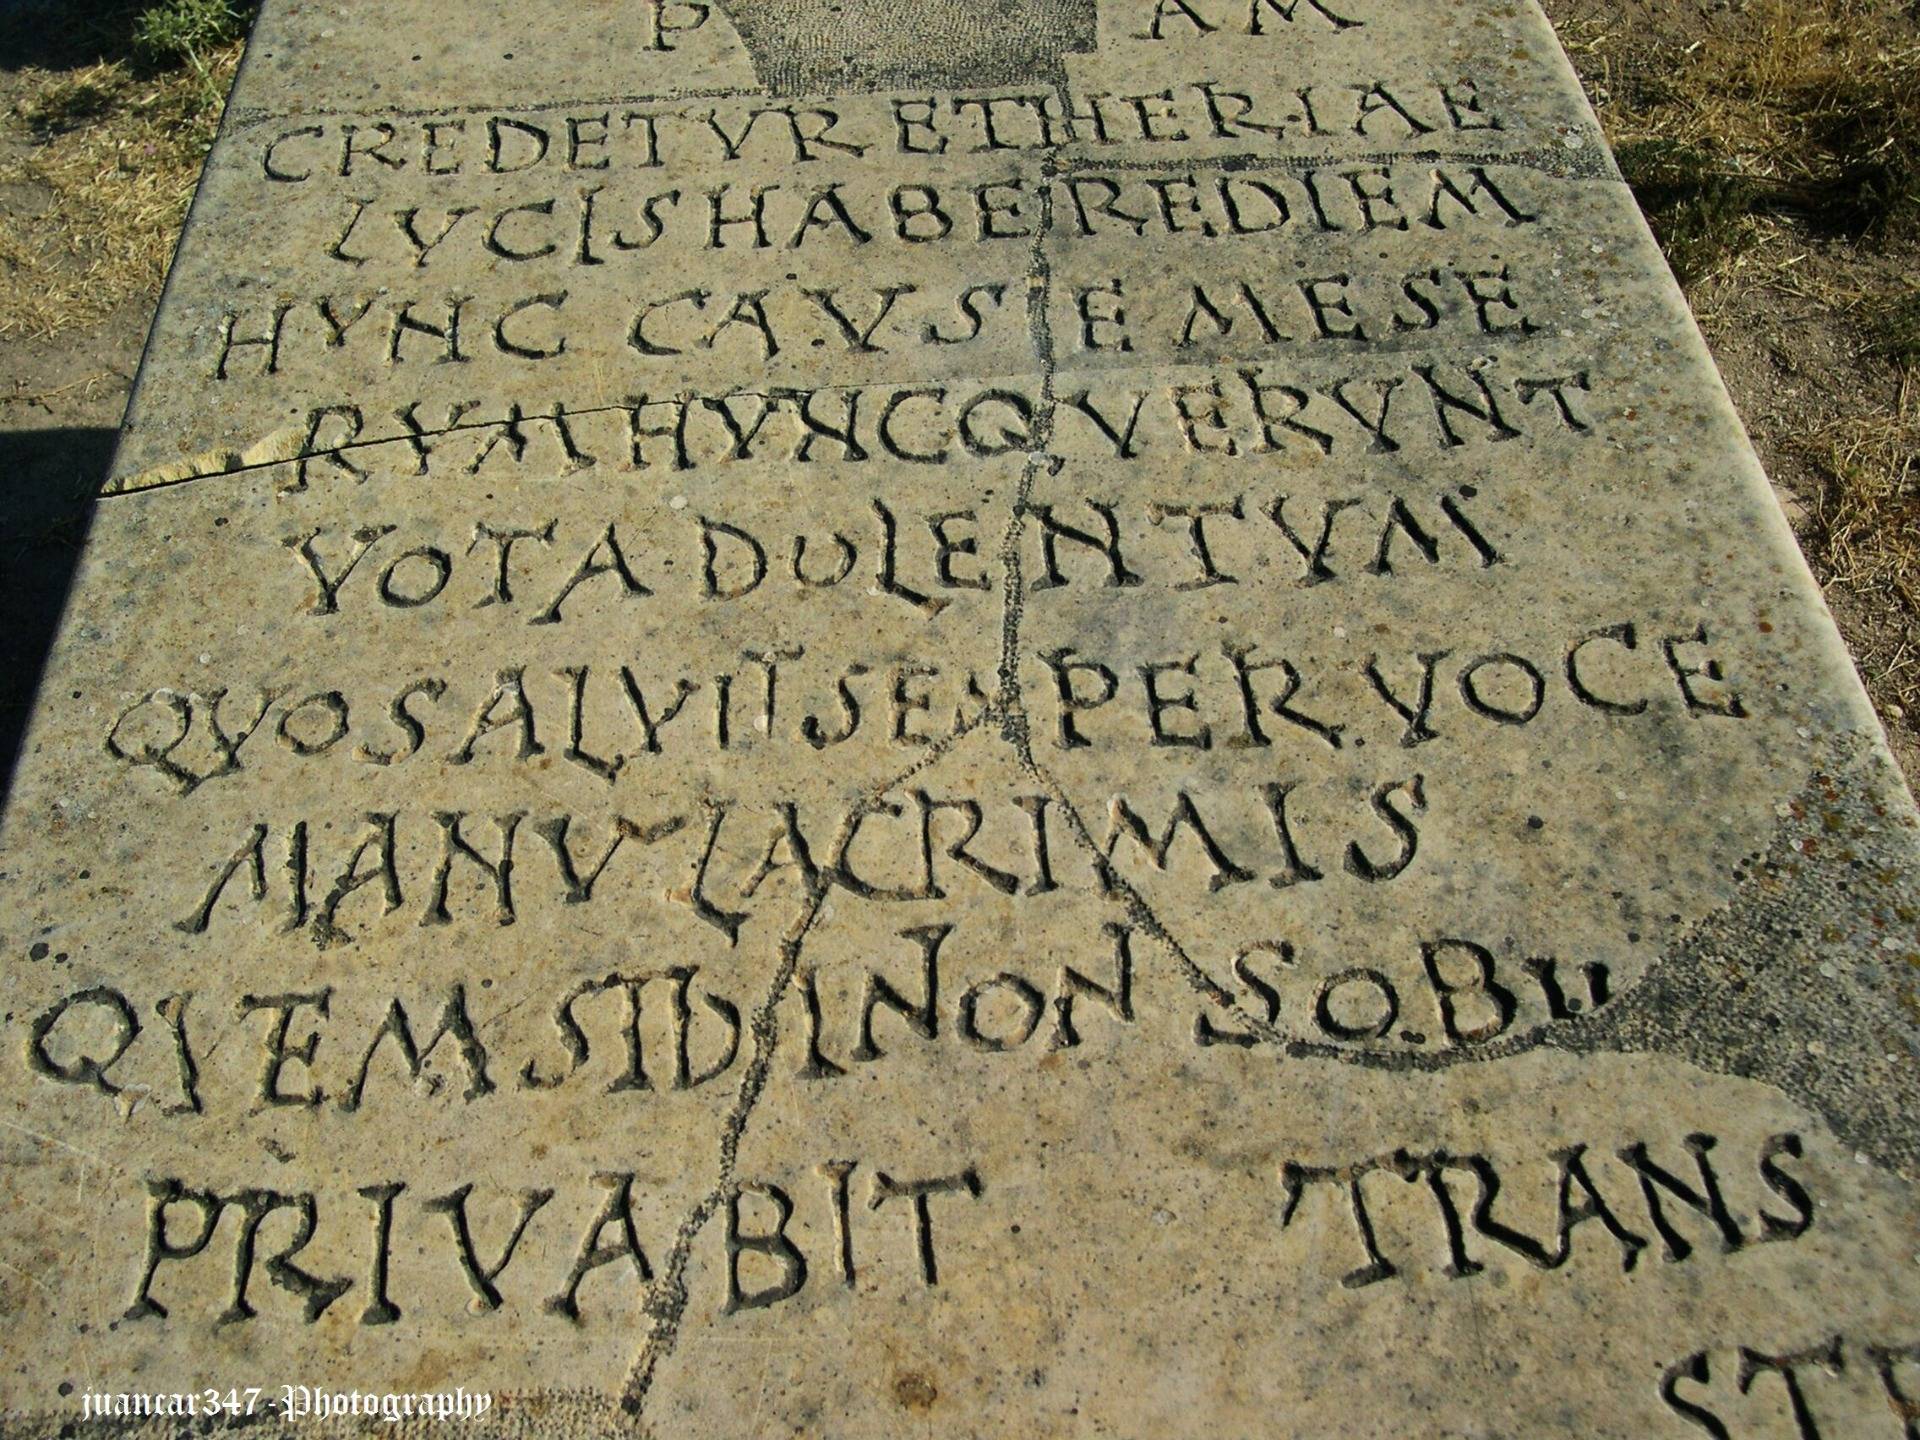 Gravestone with Latin characters